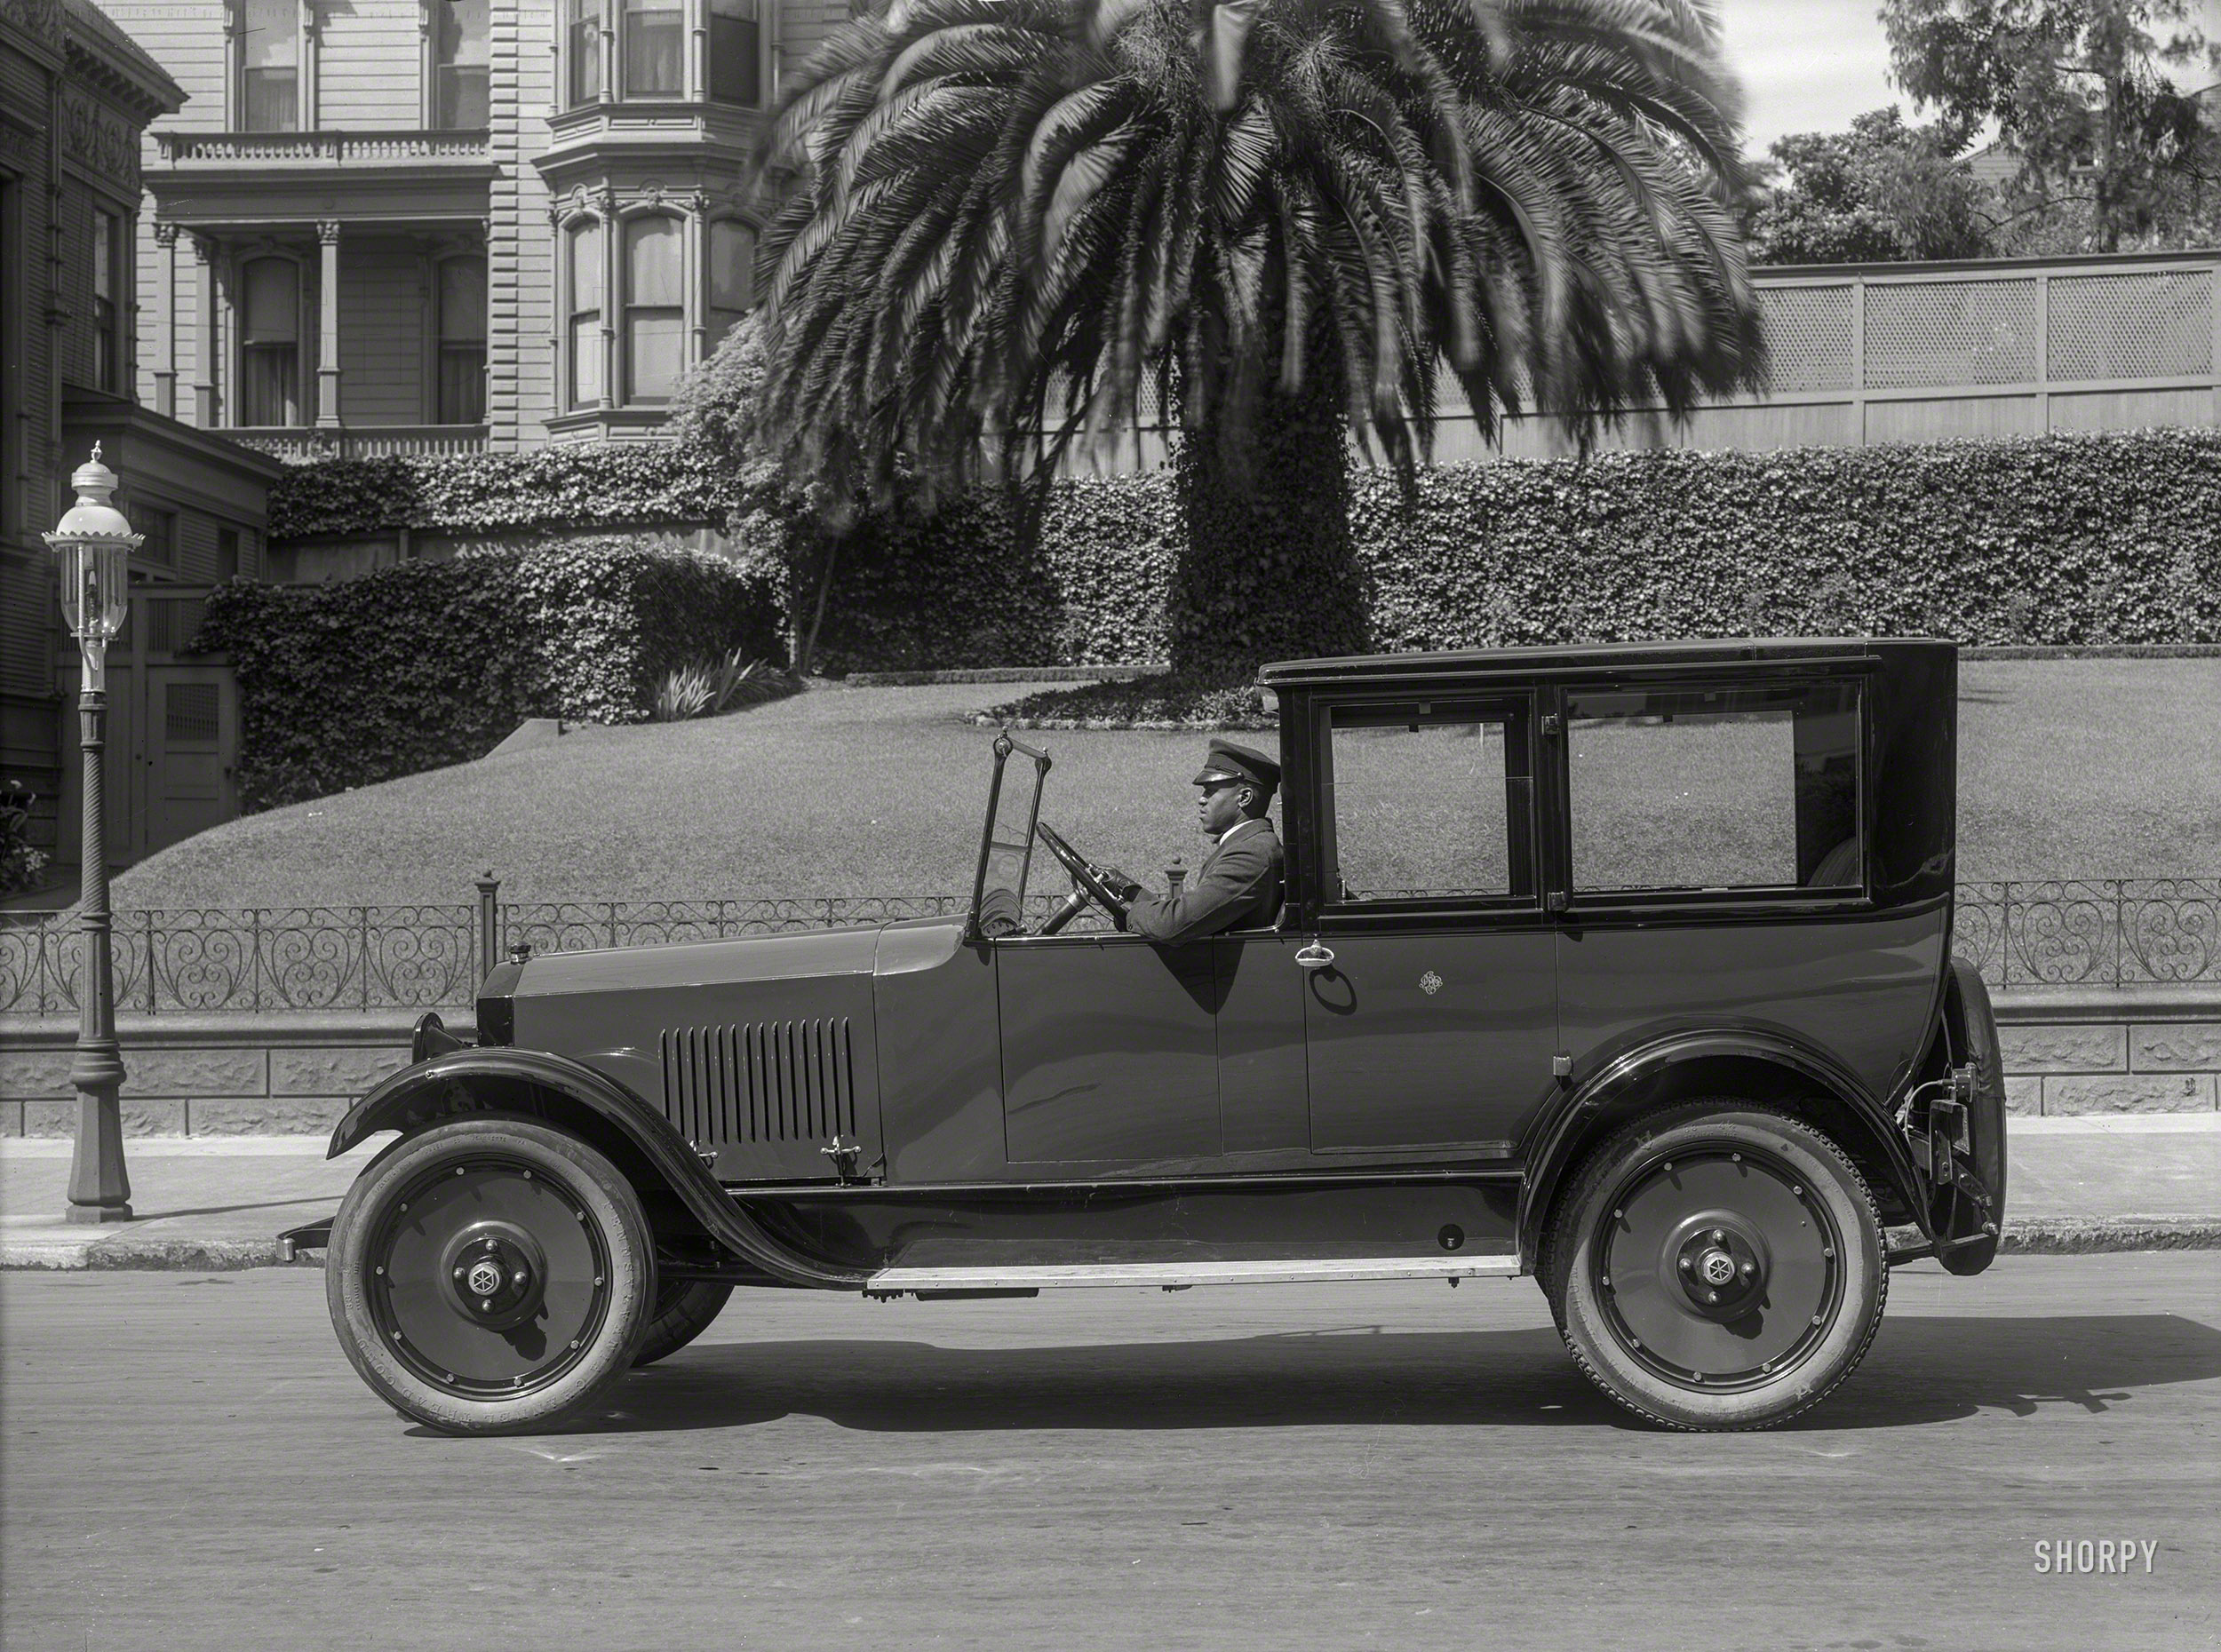 San Francisco circa 1920. "Studebaker Big Six town car." In what must be one of the city's tonier districts. 5x7 glass negative by Christopher Helin. View full size.